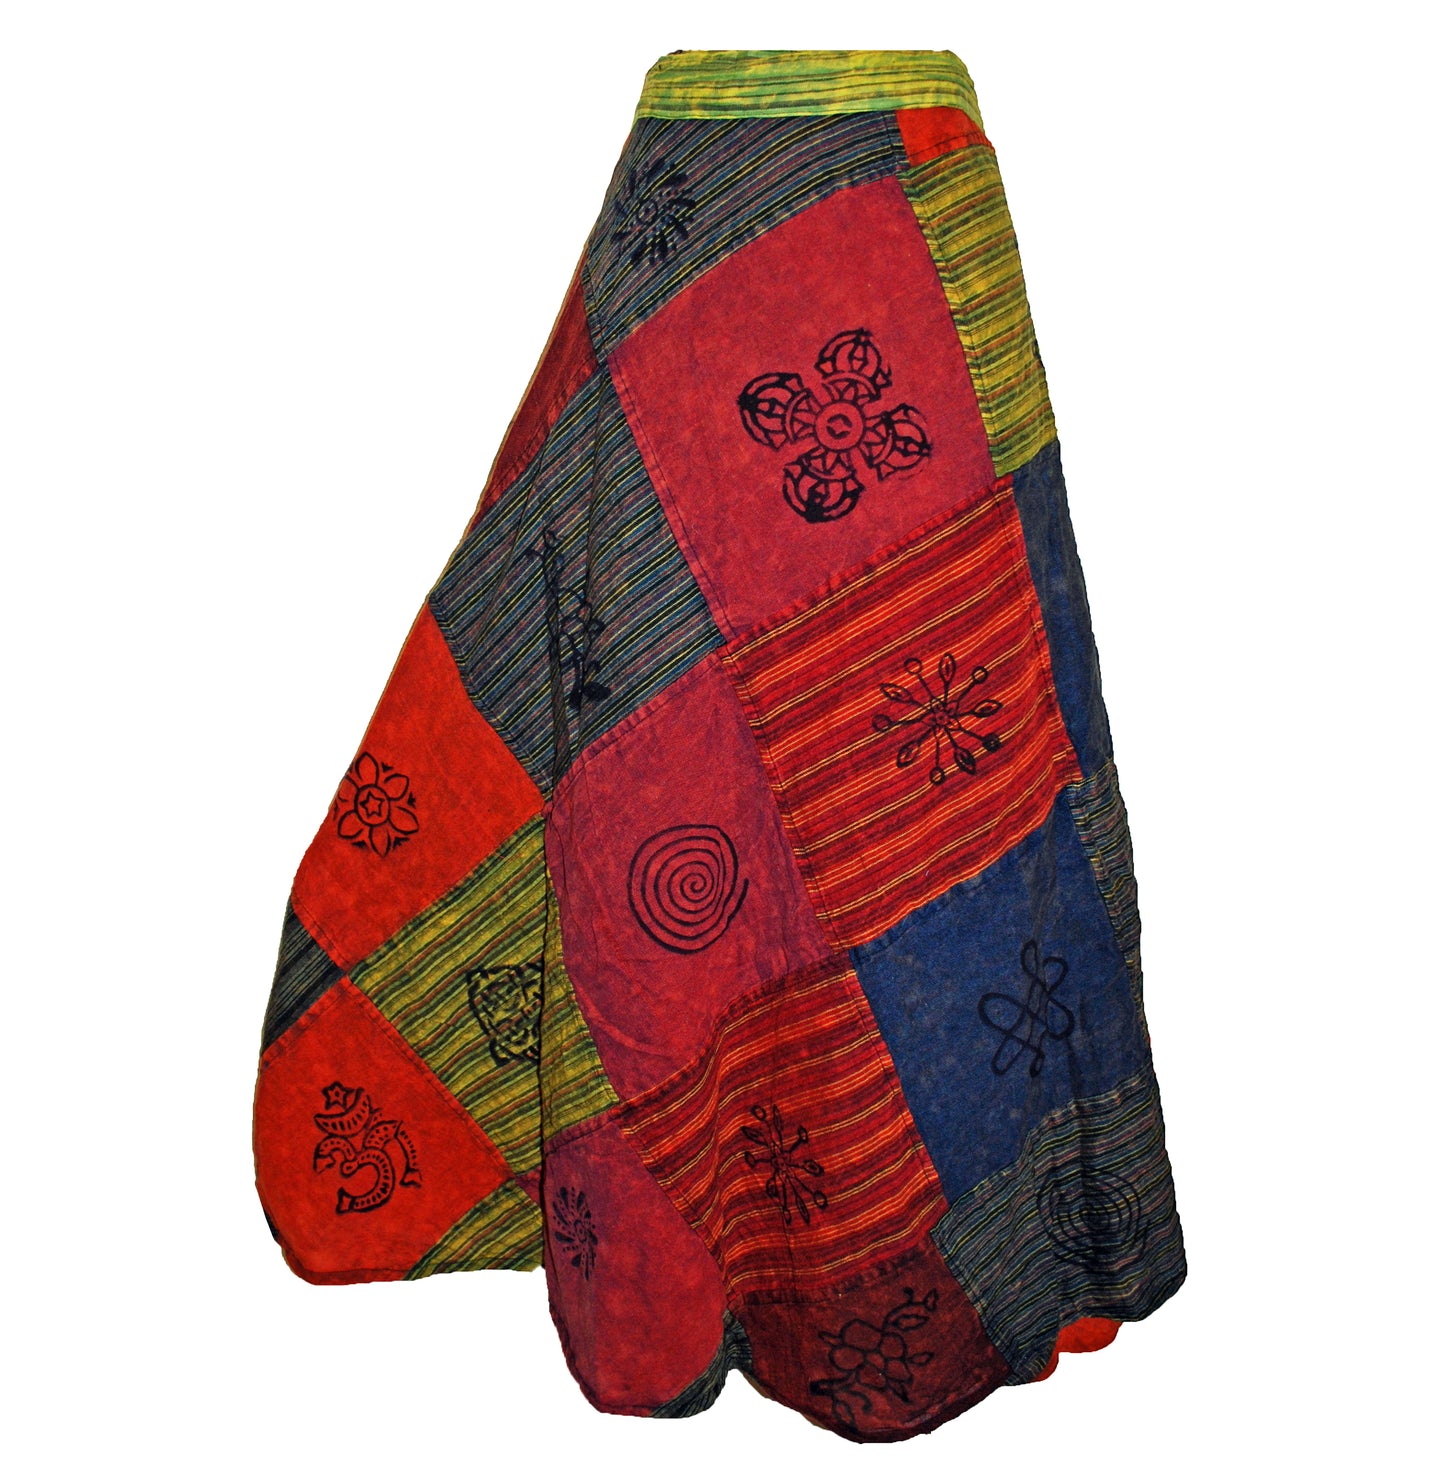 Printed Patchwork Cotton Wrap Skirt